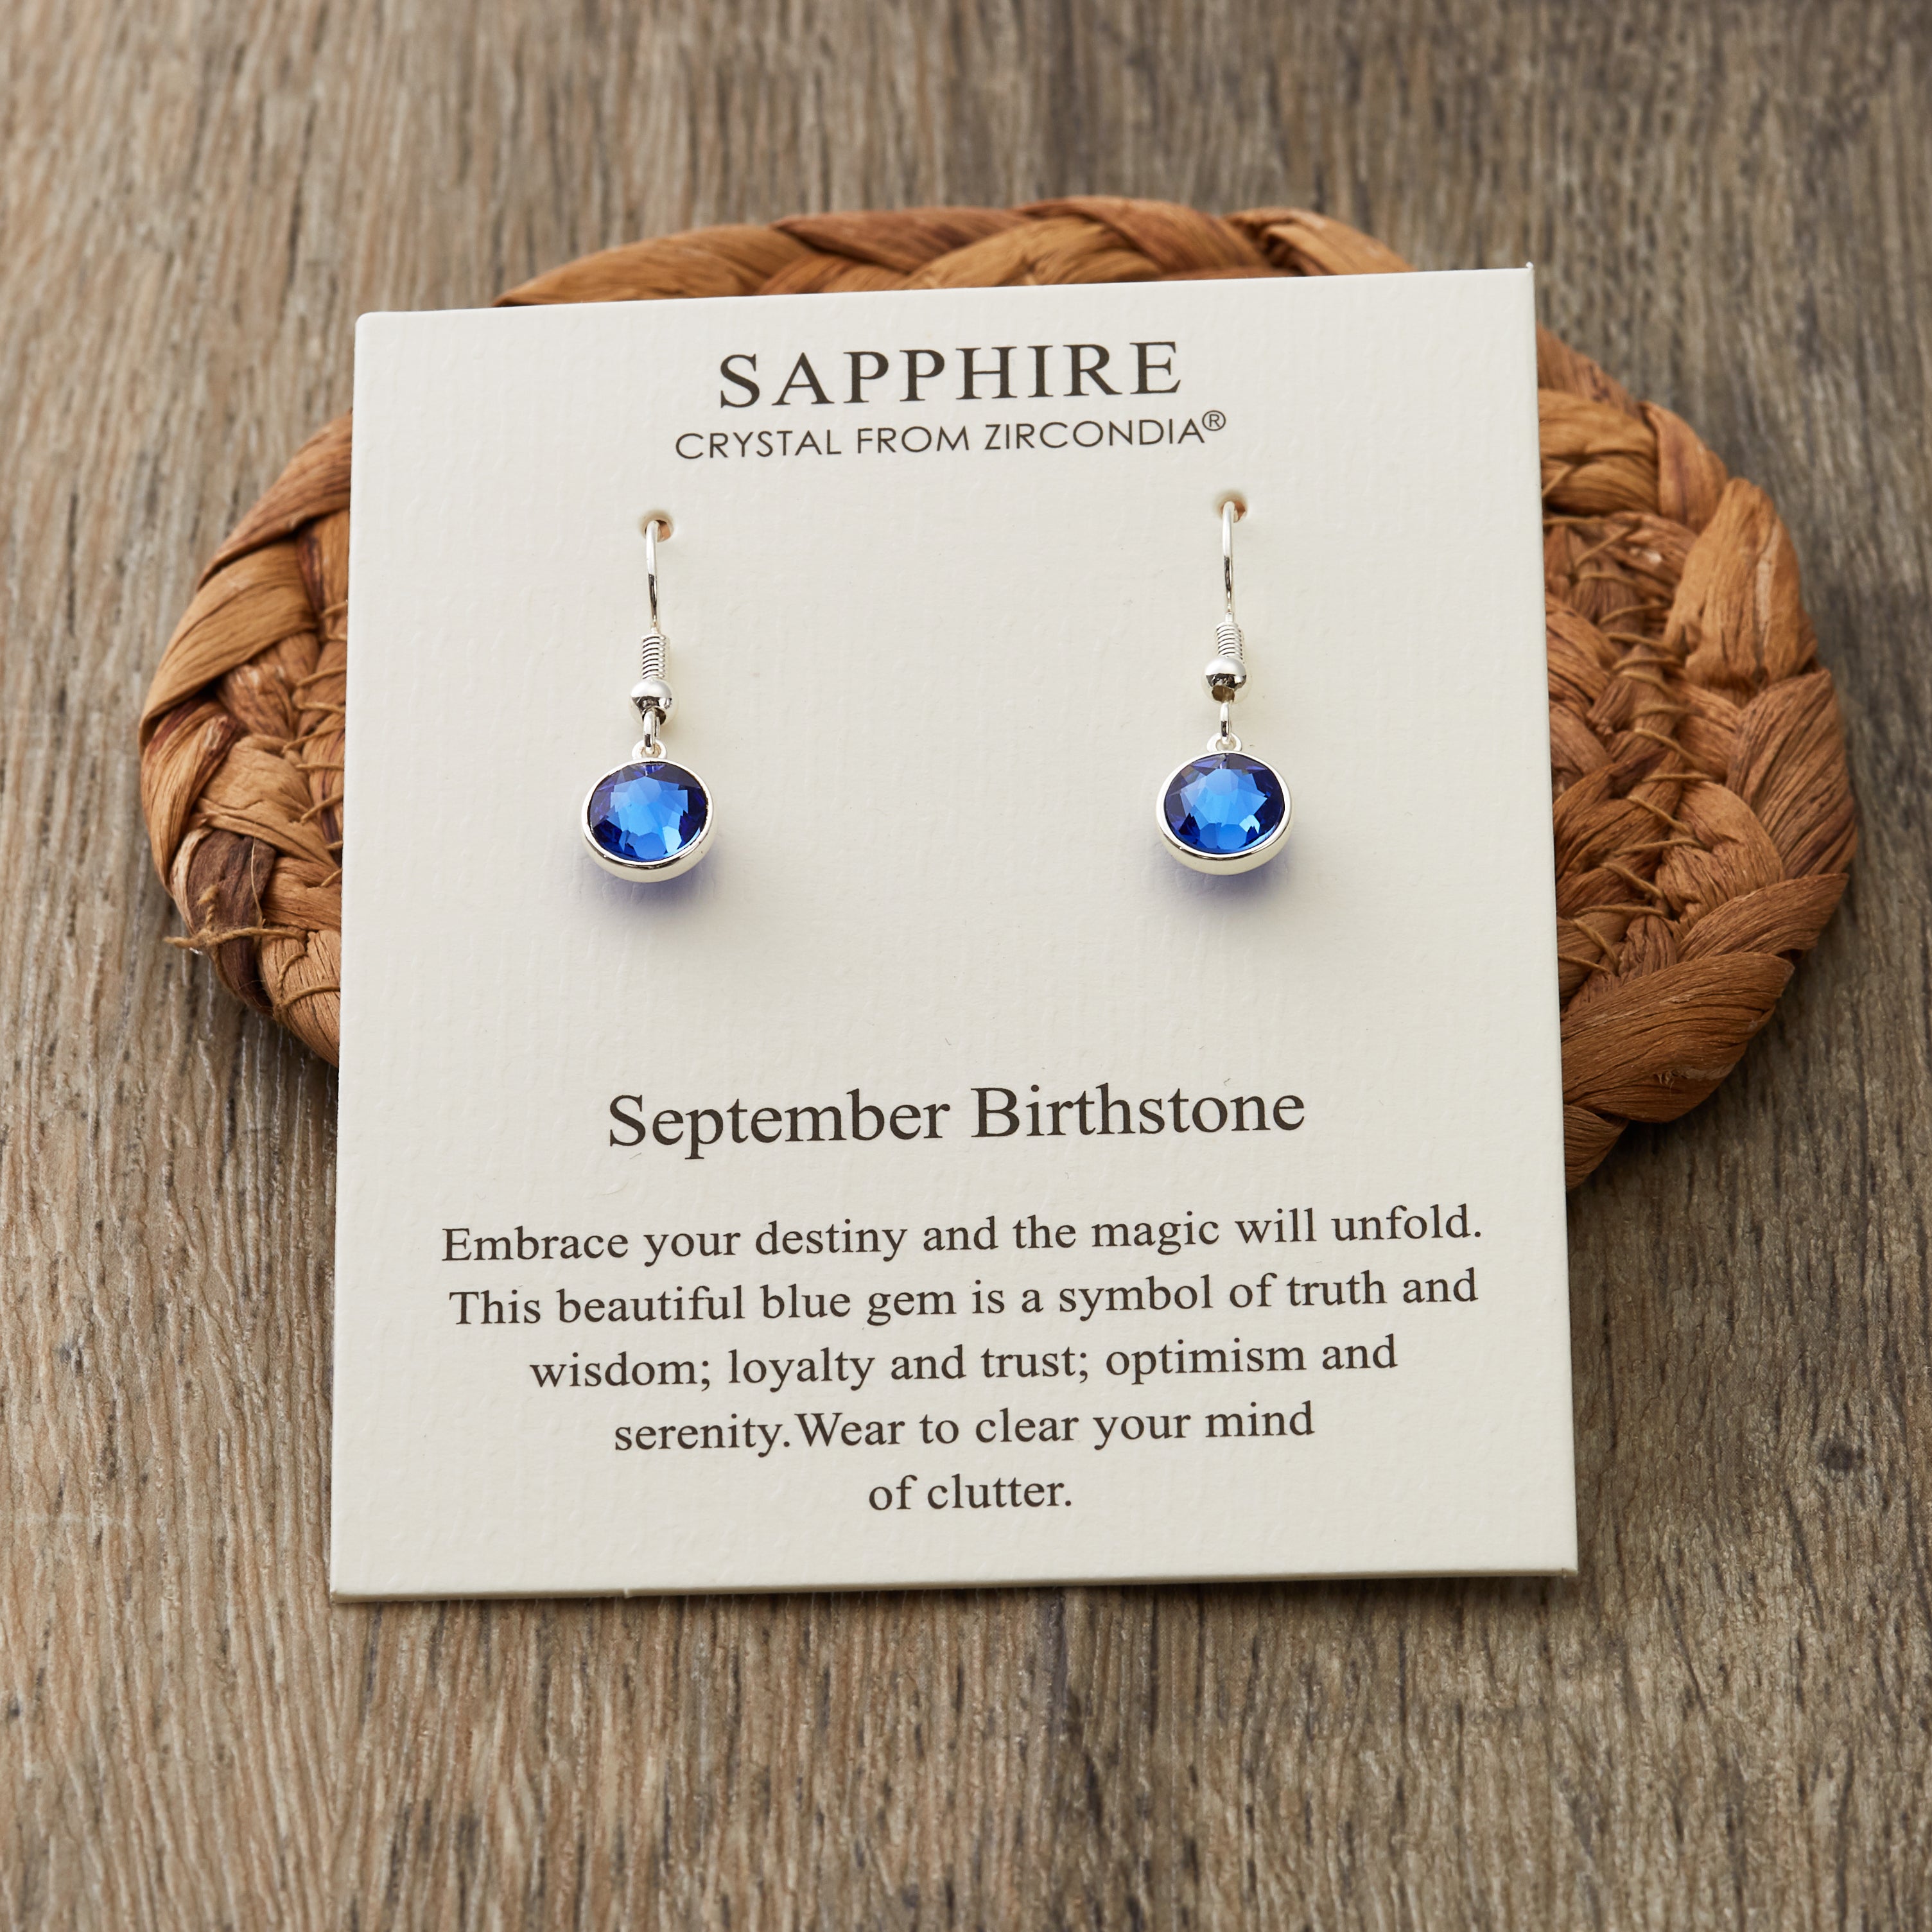 September Birthstone Drop Earrings Created with Sapphire Zircondia® Crystals